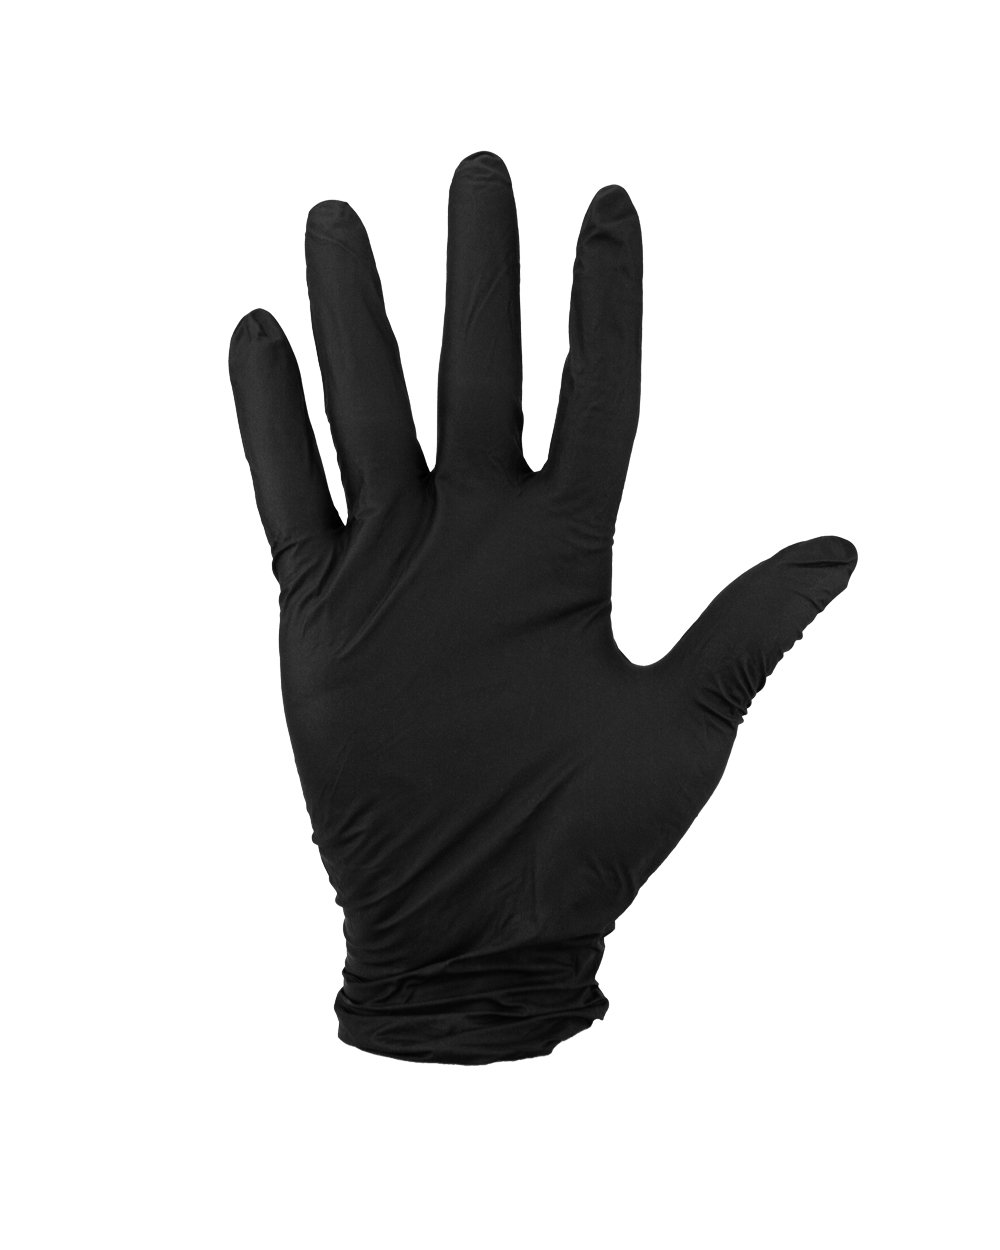 HAND TECH | Powder-Free Disposable Gloves | Black - Nitrile - 100 Count - 2